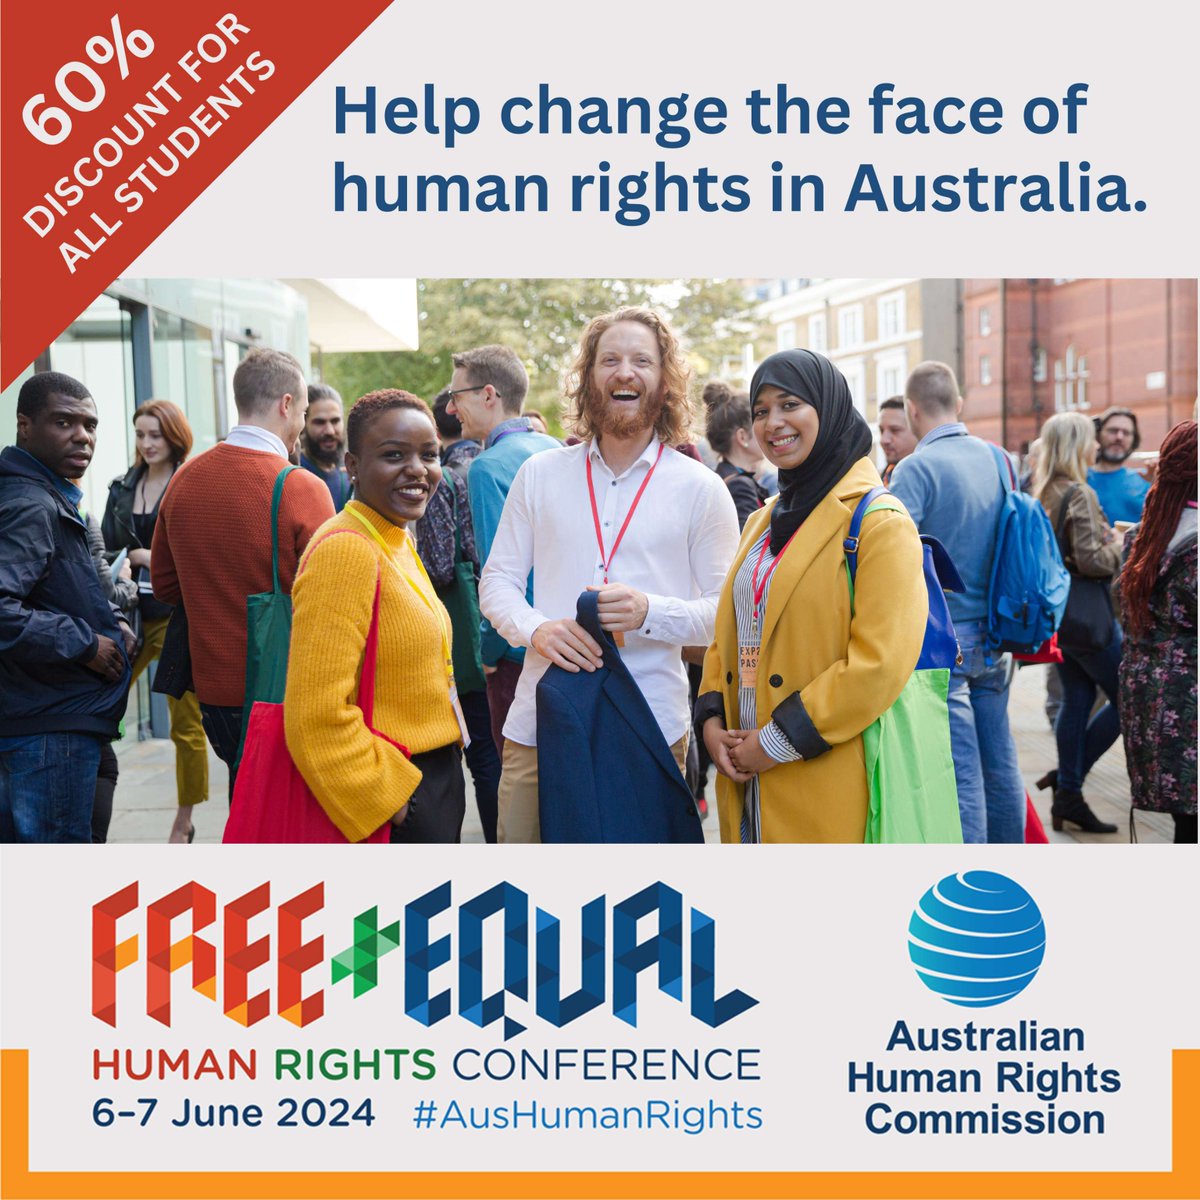 Just 4 weeks left to the Australian Human Rights Commission's Free + Equal Conference. AHRC has now announced keynote speakers Michael Kirby and Jennifer Robinson, and that there is a 60% discount for students - go check it out and register now! freeandequal.com.au